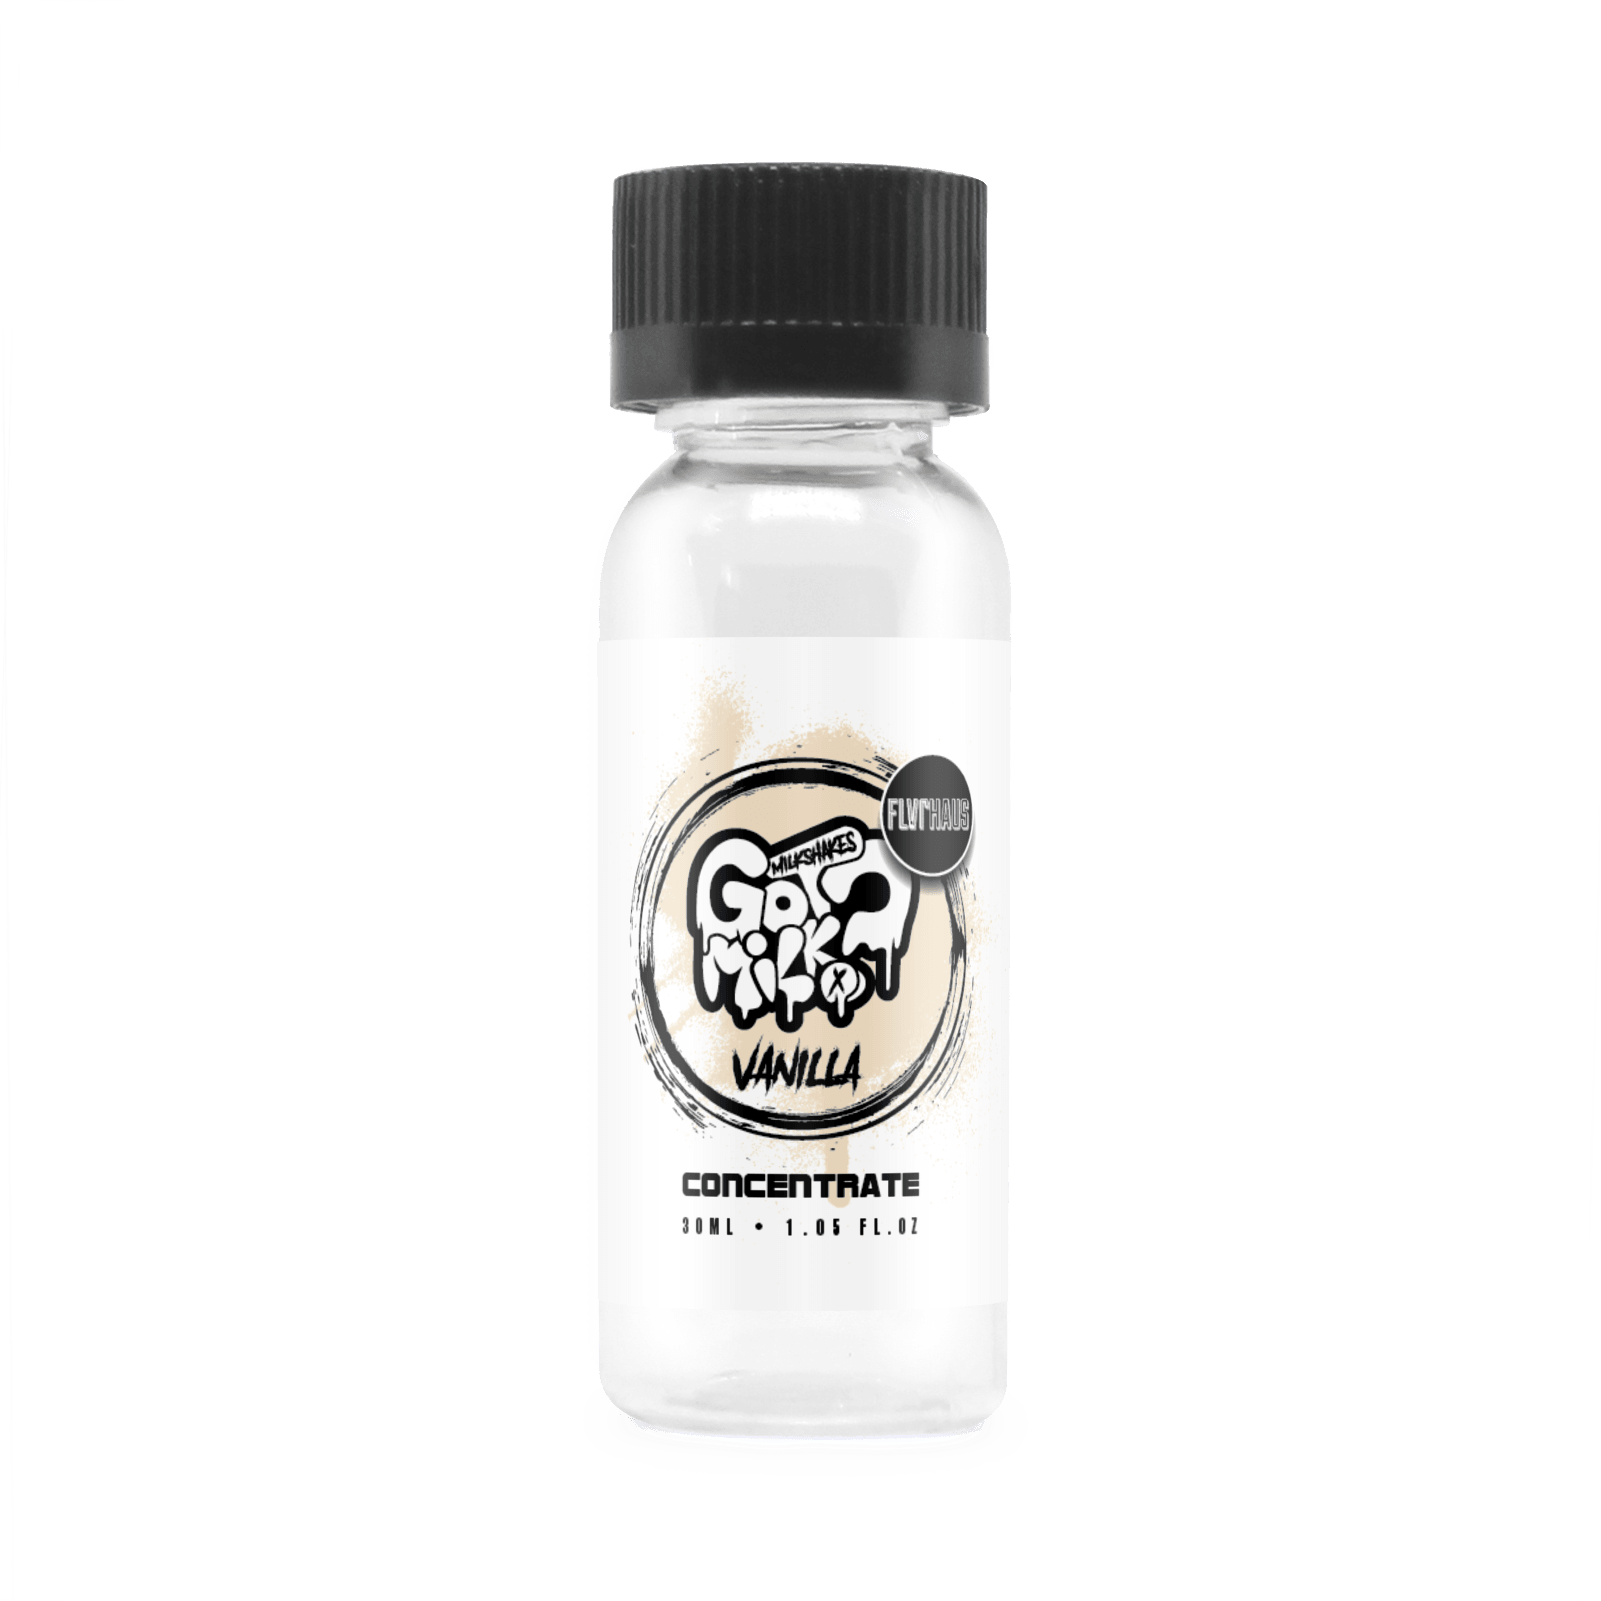 Got Milk? - Vanilla 30ml Concentrate by FLVRHAUS - The Ace Of Vapez